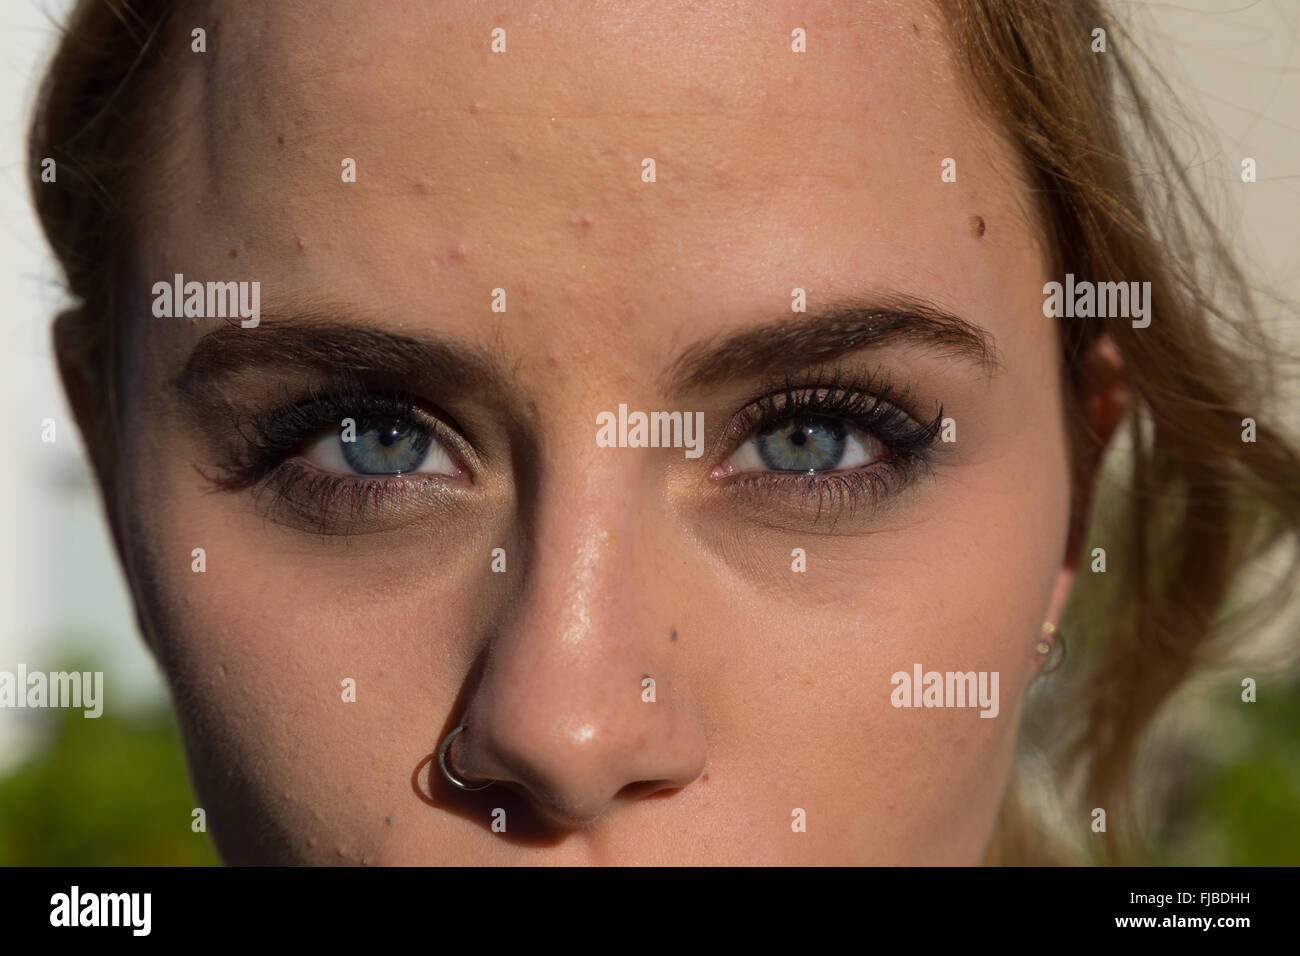 Close up of a beautiful woman's face with stunning blue eyes and a pierced nose. Stock Photo